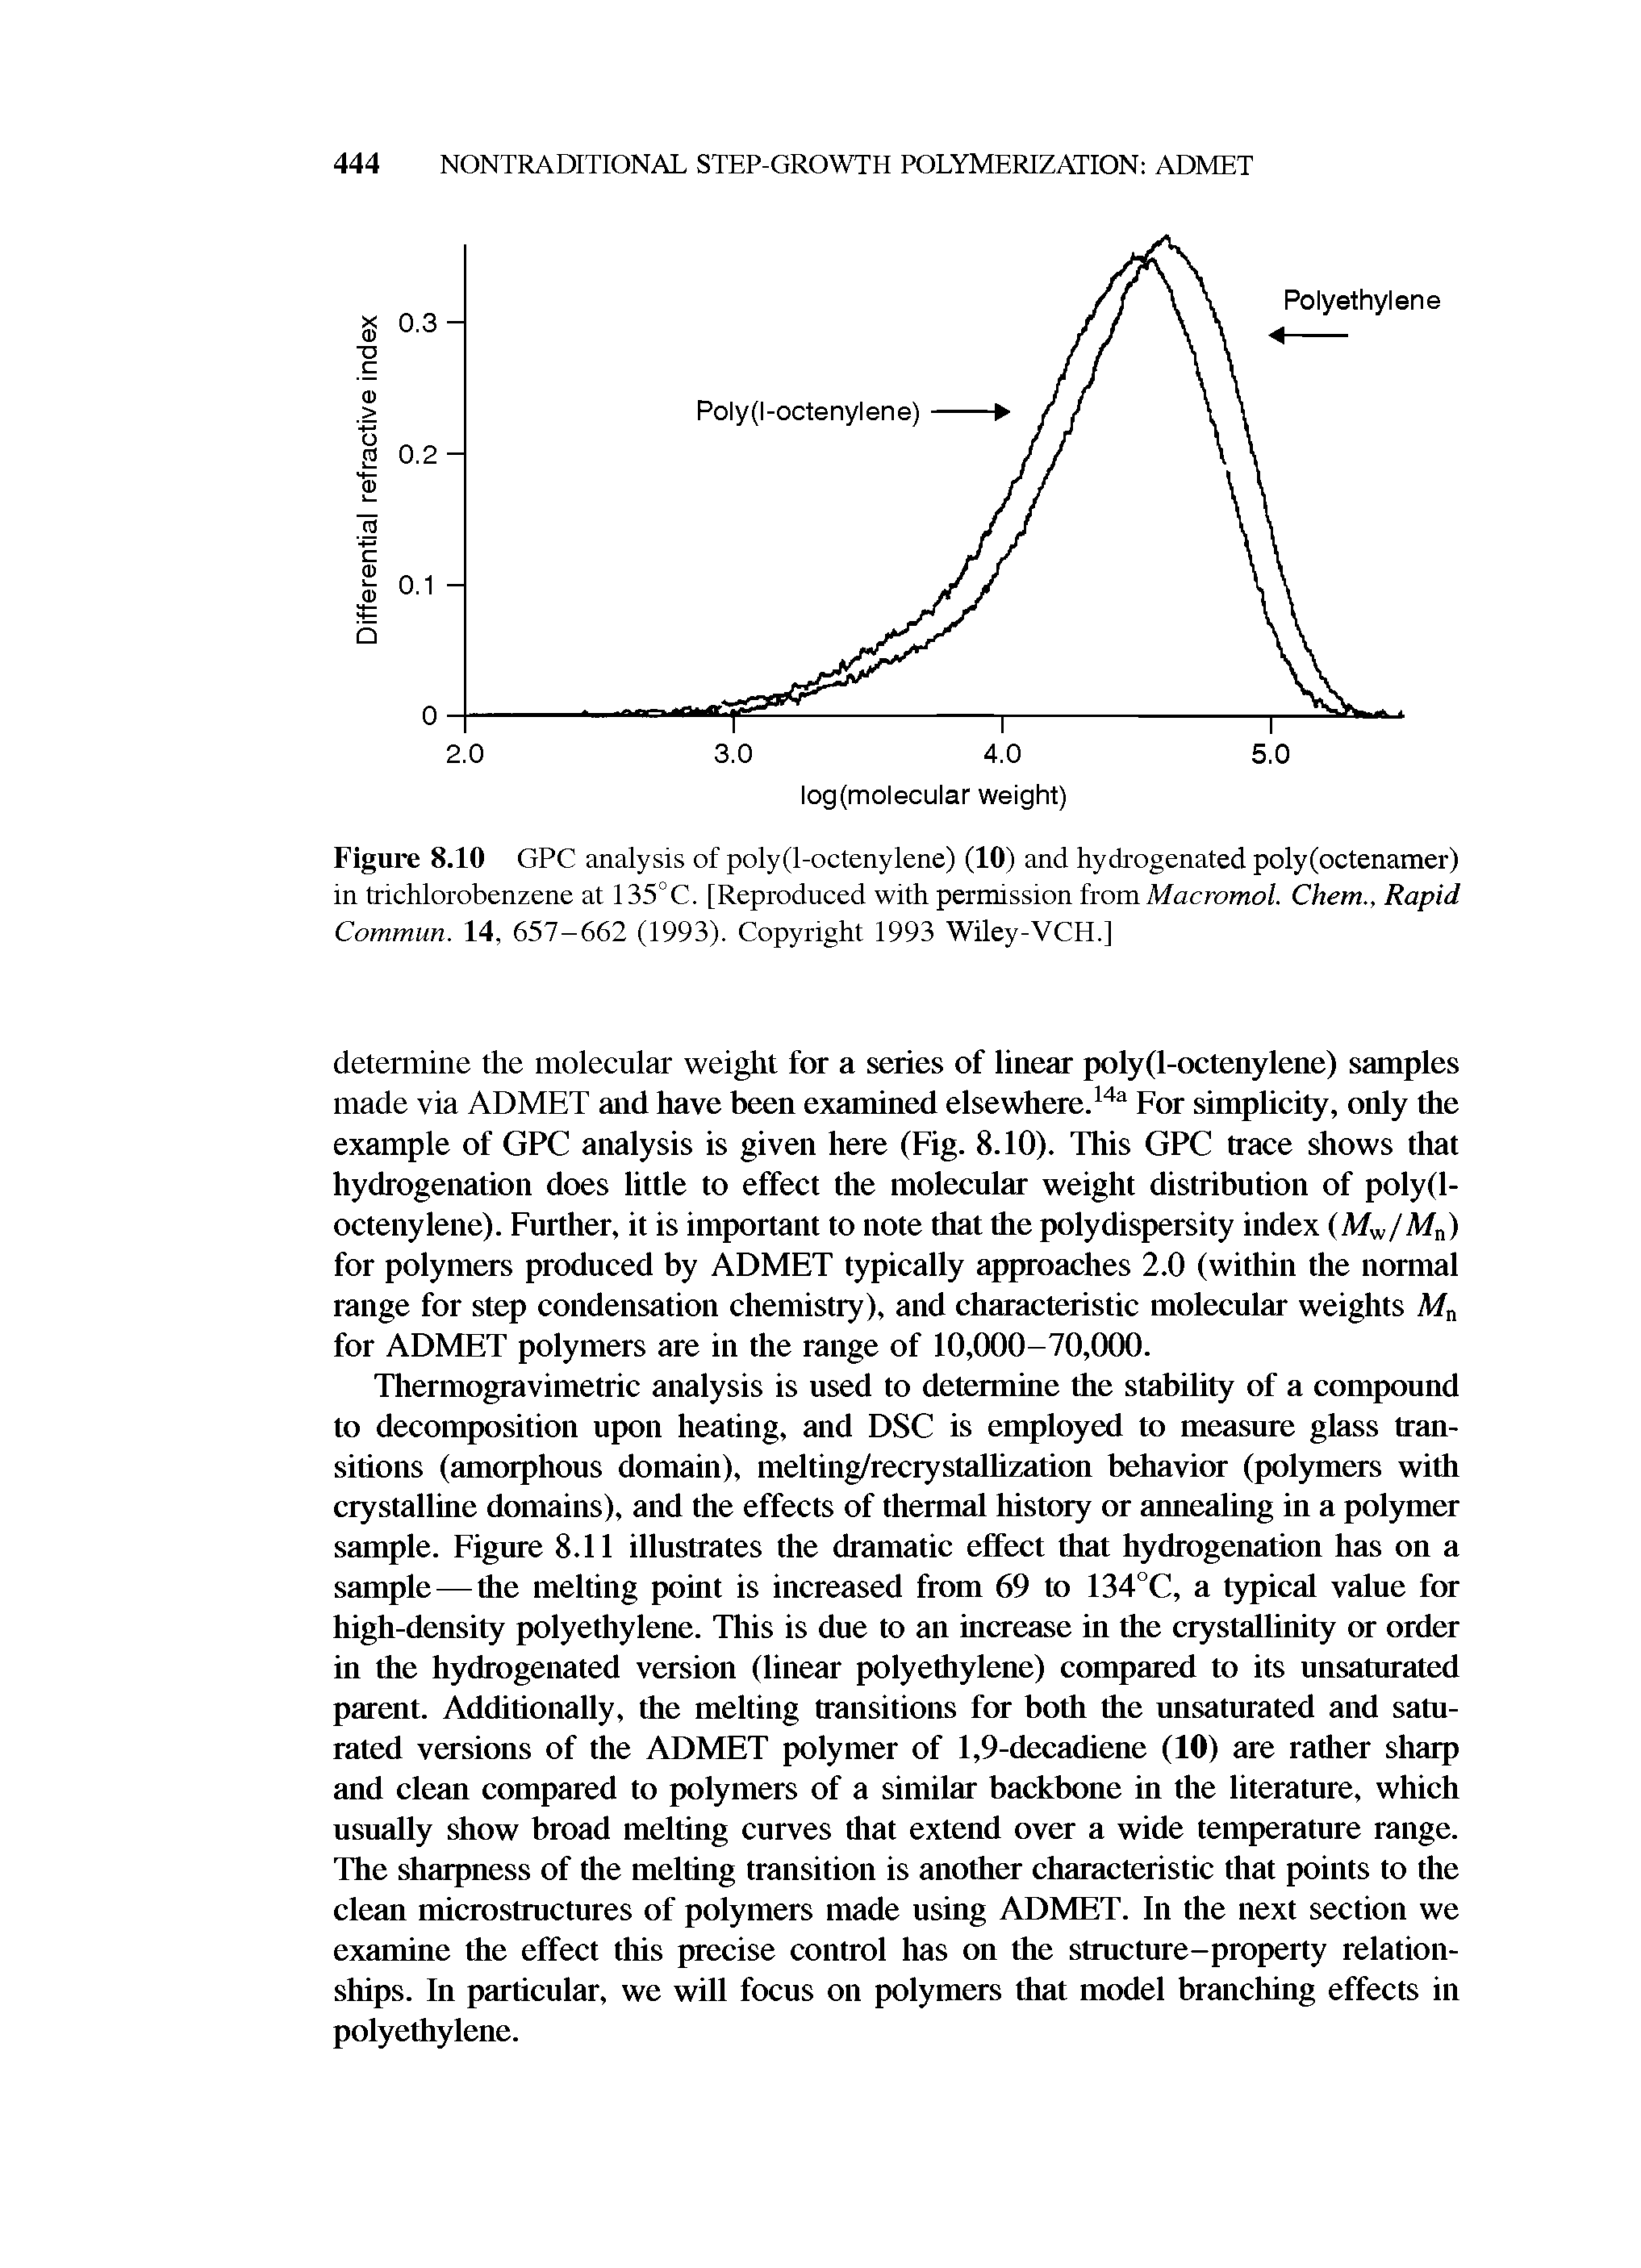 Figure 8.10 GPC analysis of poly(l-octenylene) (10) and hydrogenated poly(octenamer) in trichlorobenzene at 135°C. [Reproduced with permission from Macromol. Chem., Rapid Commun. 14, 657-662 (1993). Copyright 1993 Wiley-VCH.]...